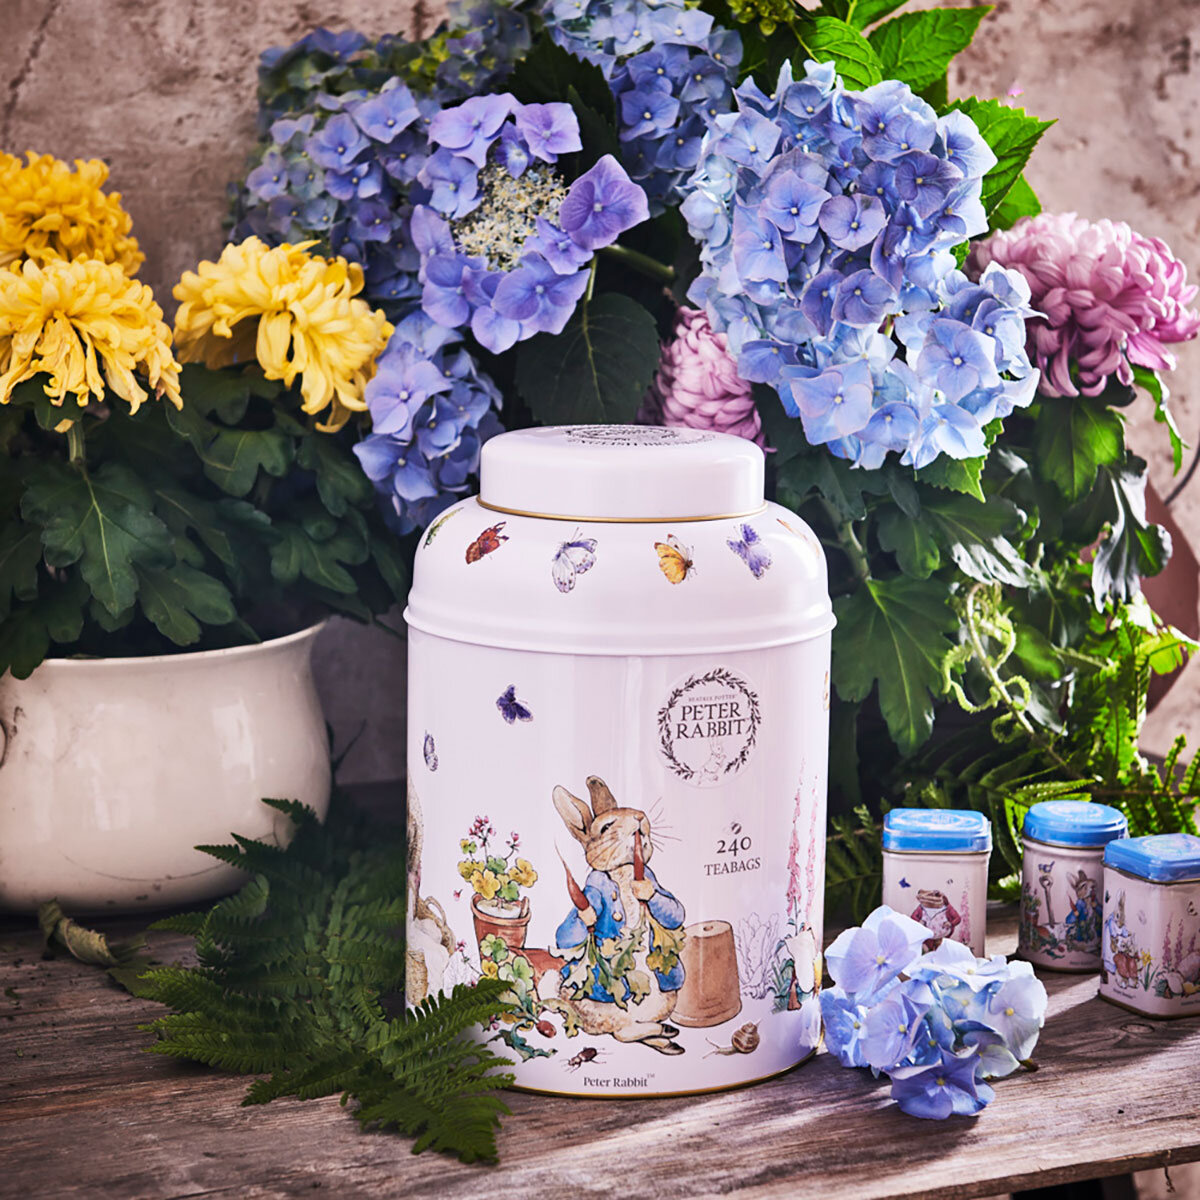 Lifestyle image of tea caddy surrounded by flowers